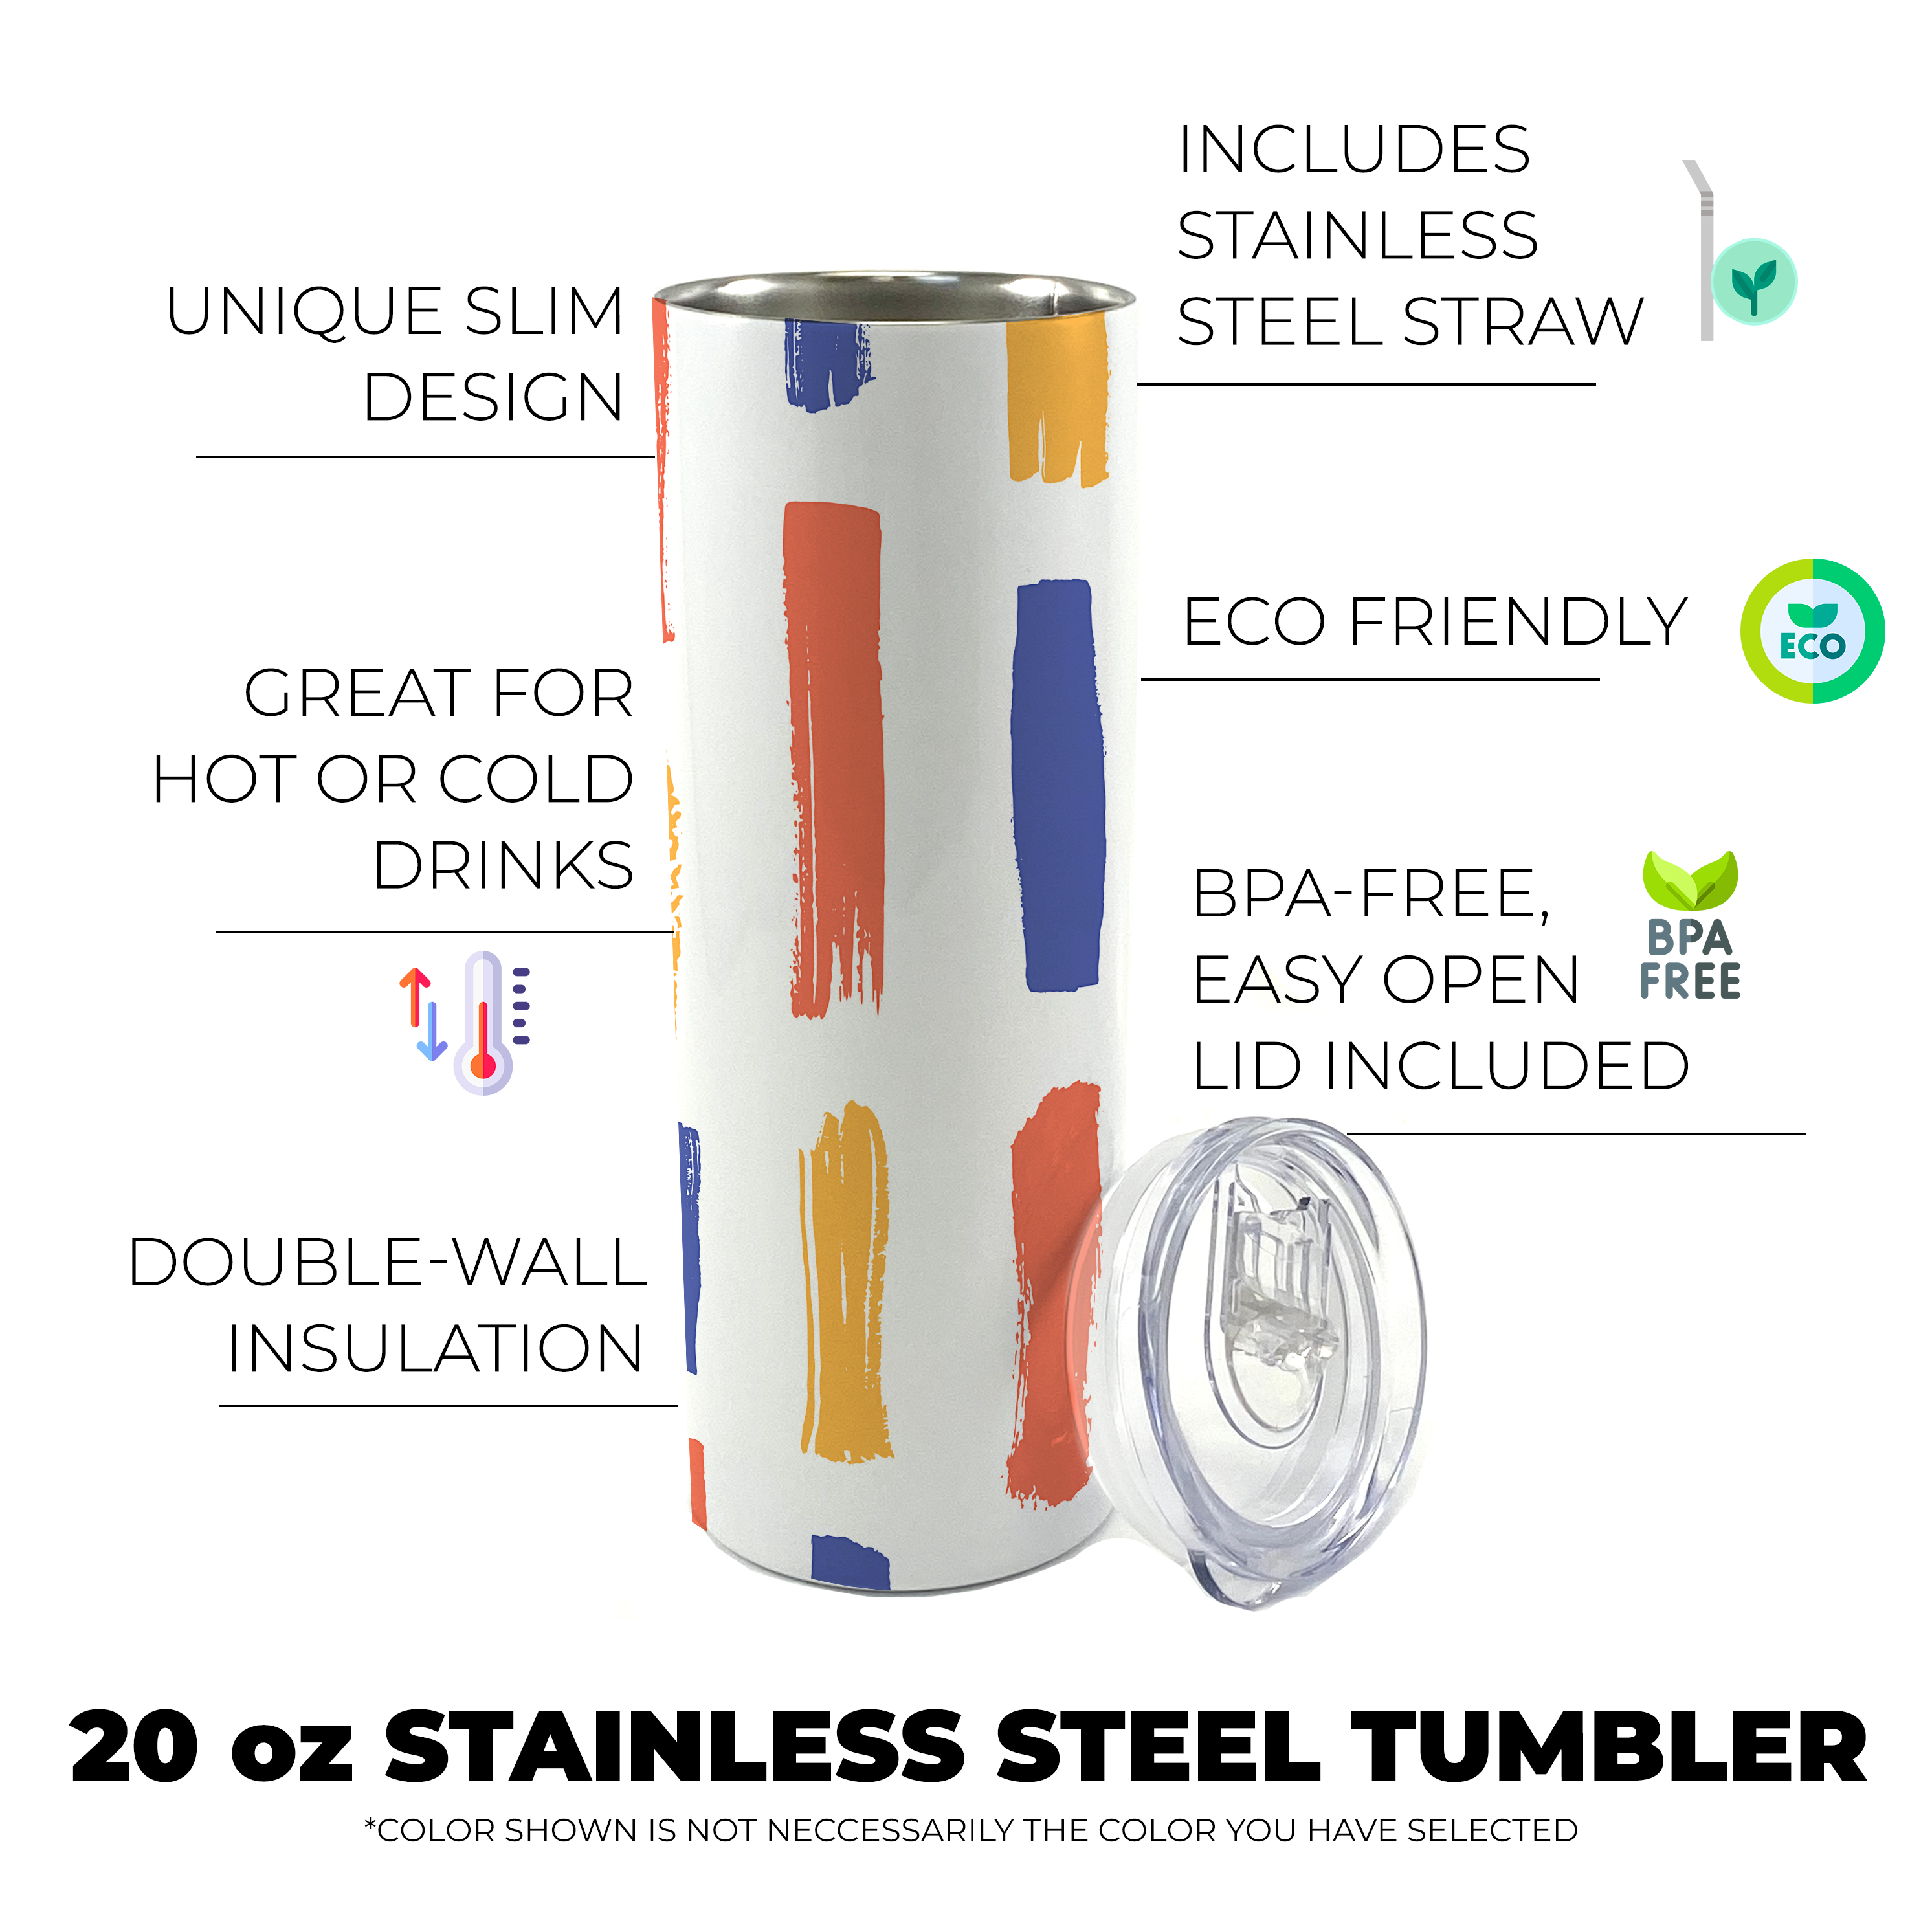 Trend Setters Originals (Paint Strokes) 20 Oz Stainless Steel Travel Tumbler with Straw